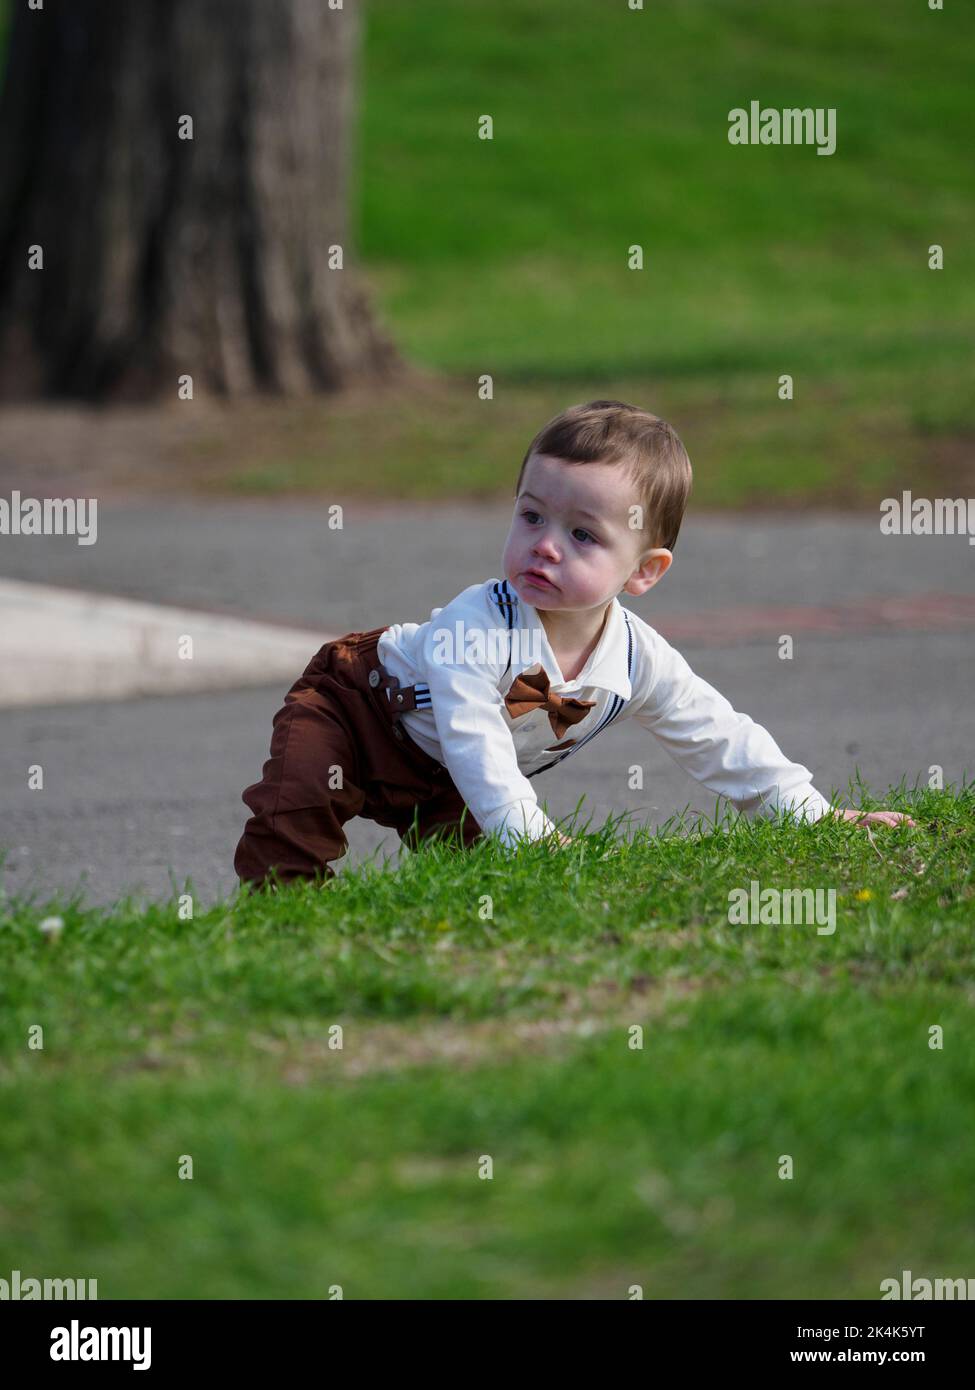 Smartly dressed toddler. Stock Photo